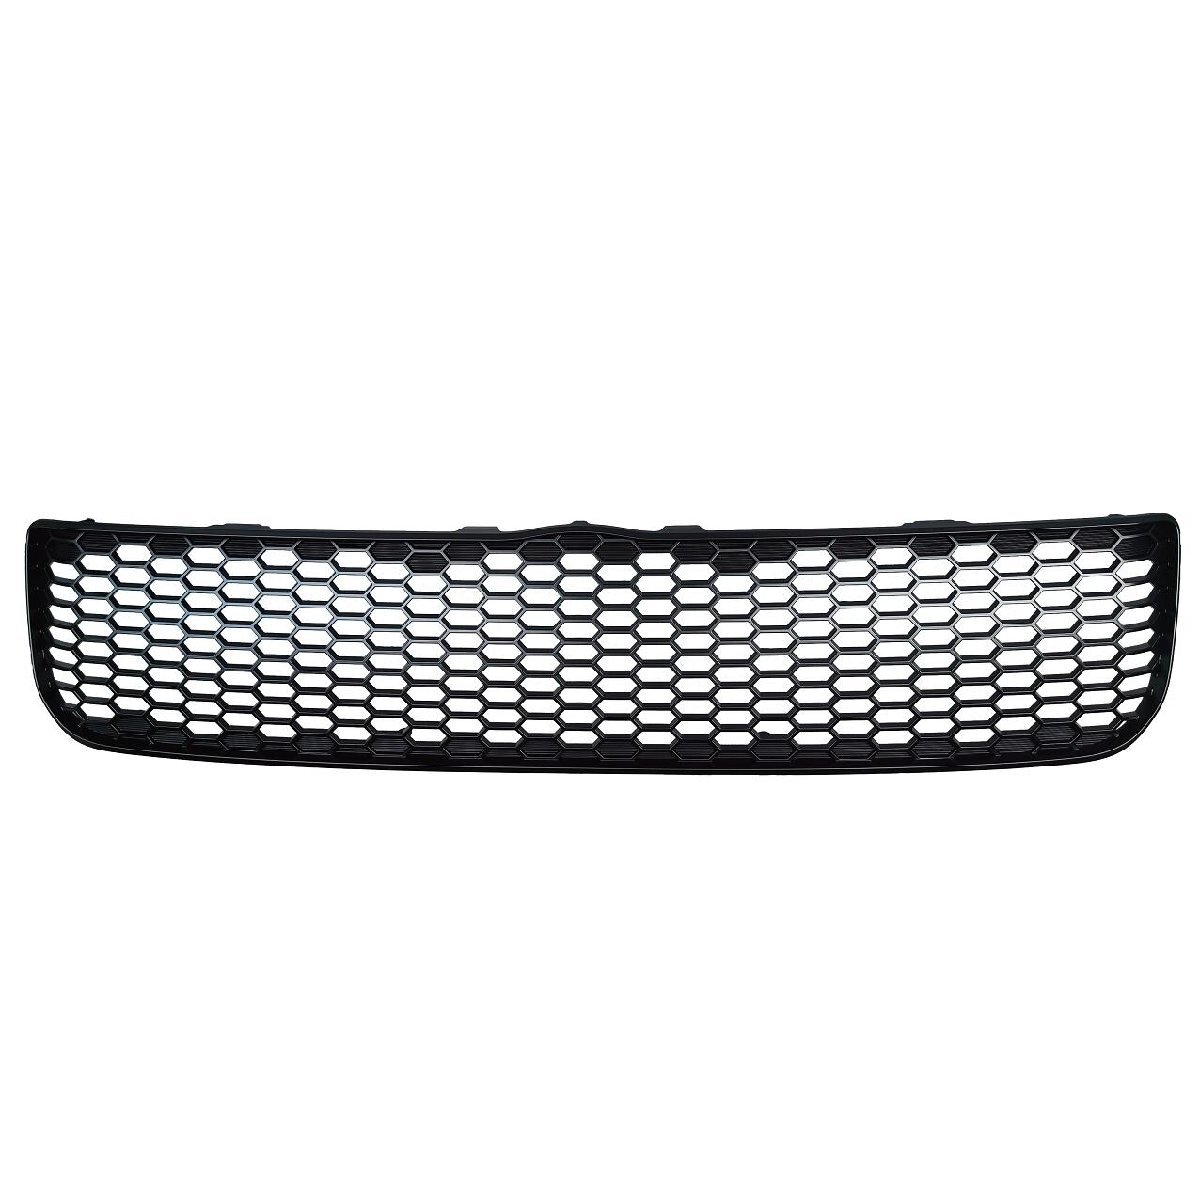  Toyota Succeed 50 series grill emblem stay mat black NCP50V NCP51V NCP52V NCP55V NCP58V NCP59V NLP51V NCP58G NCP59G